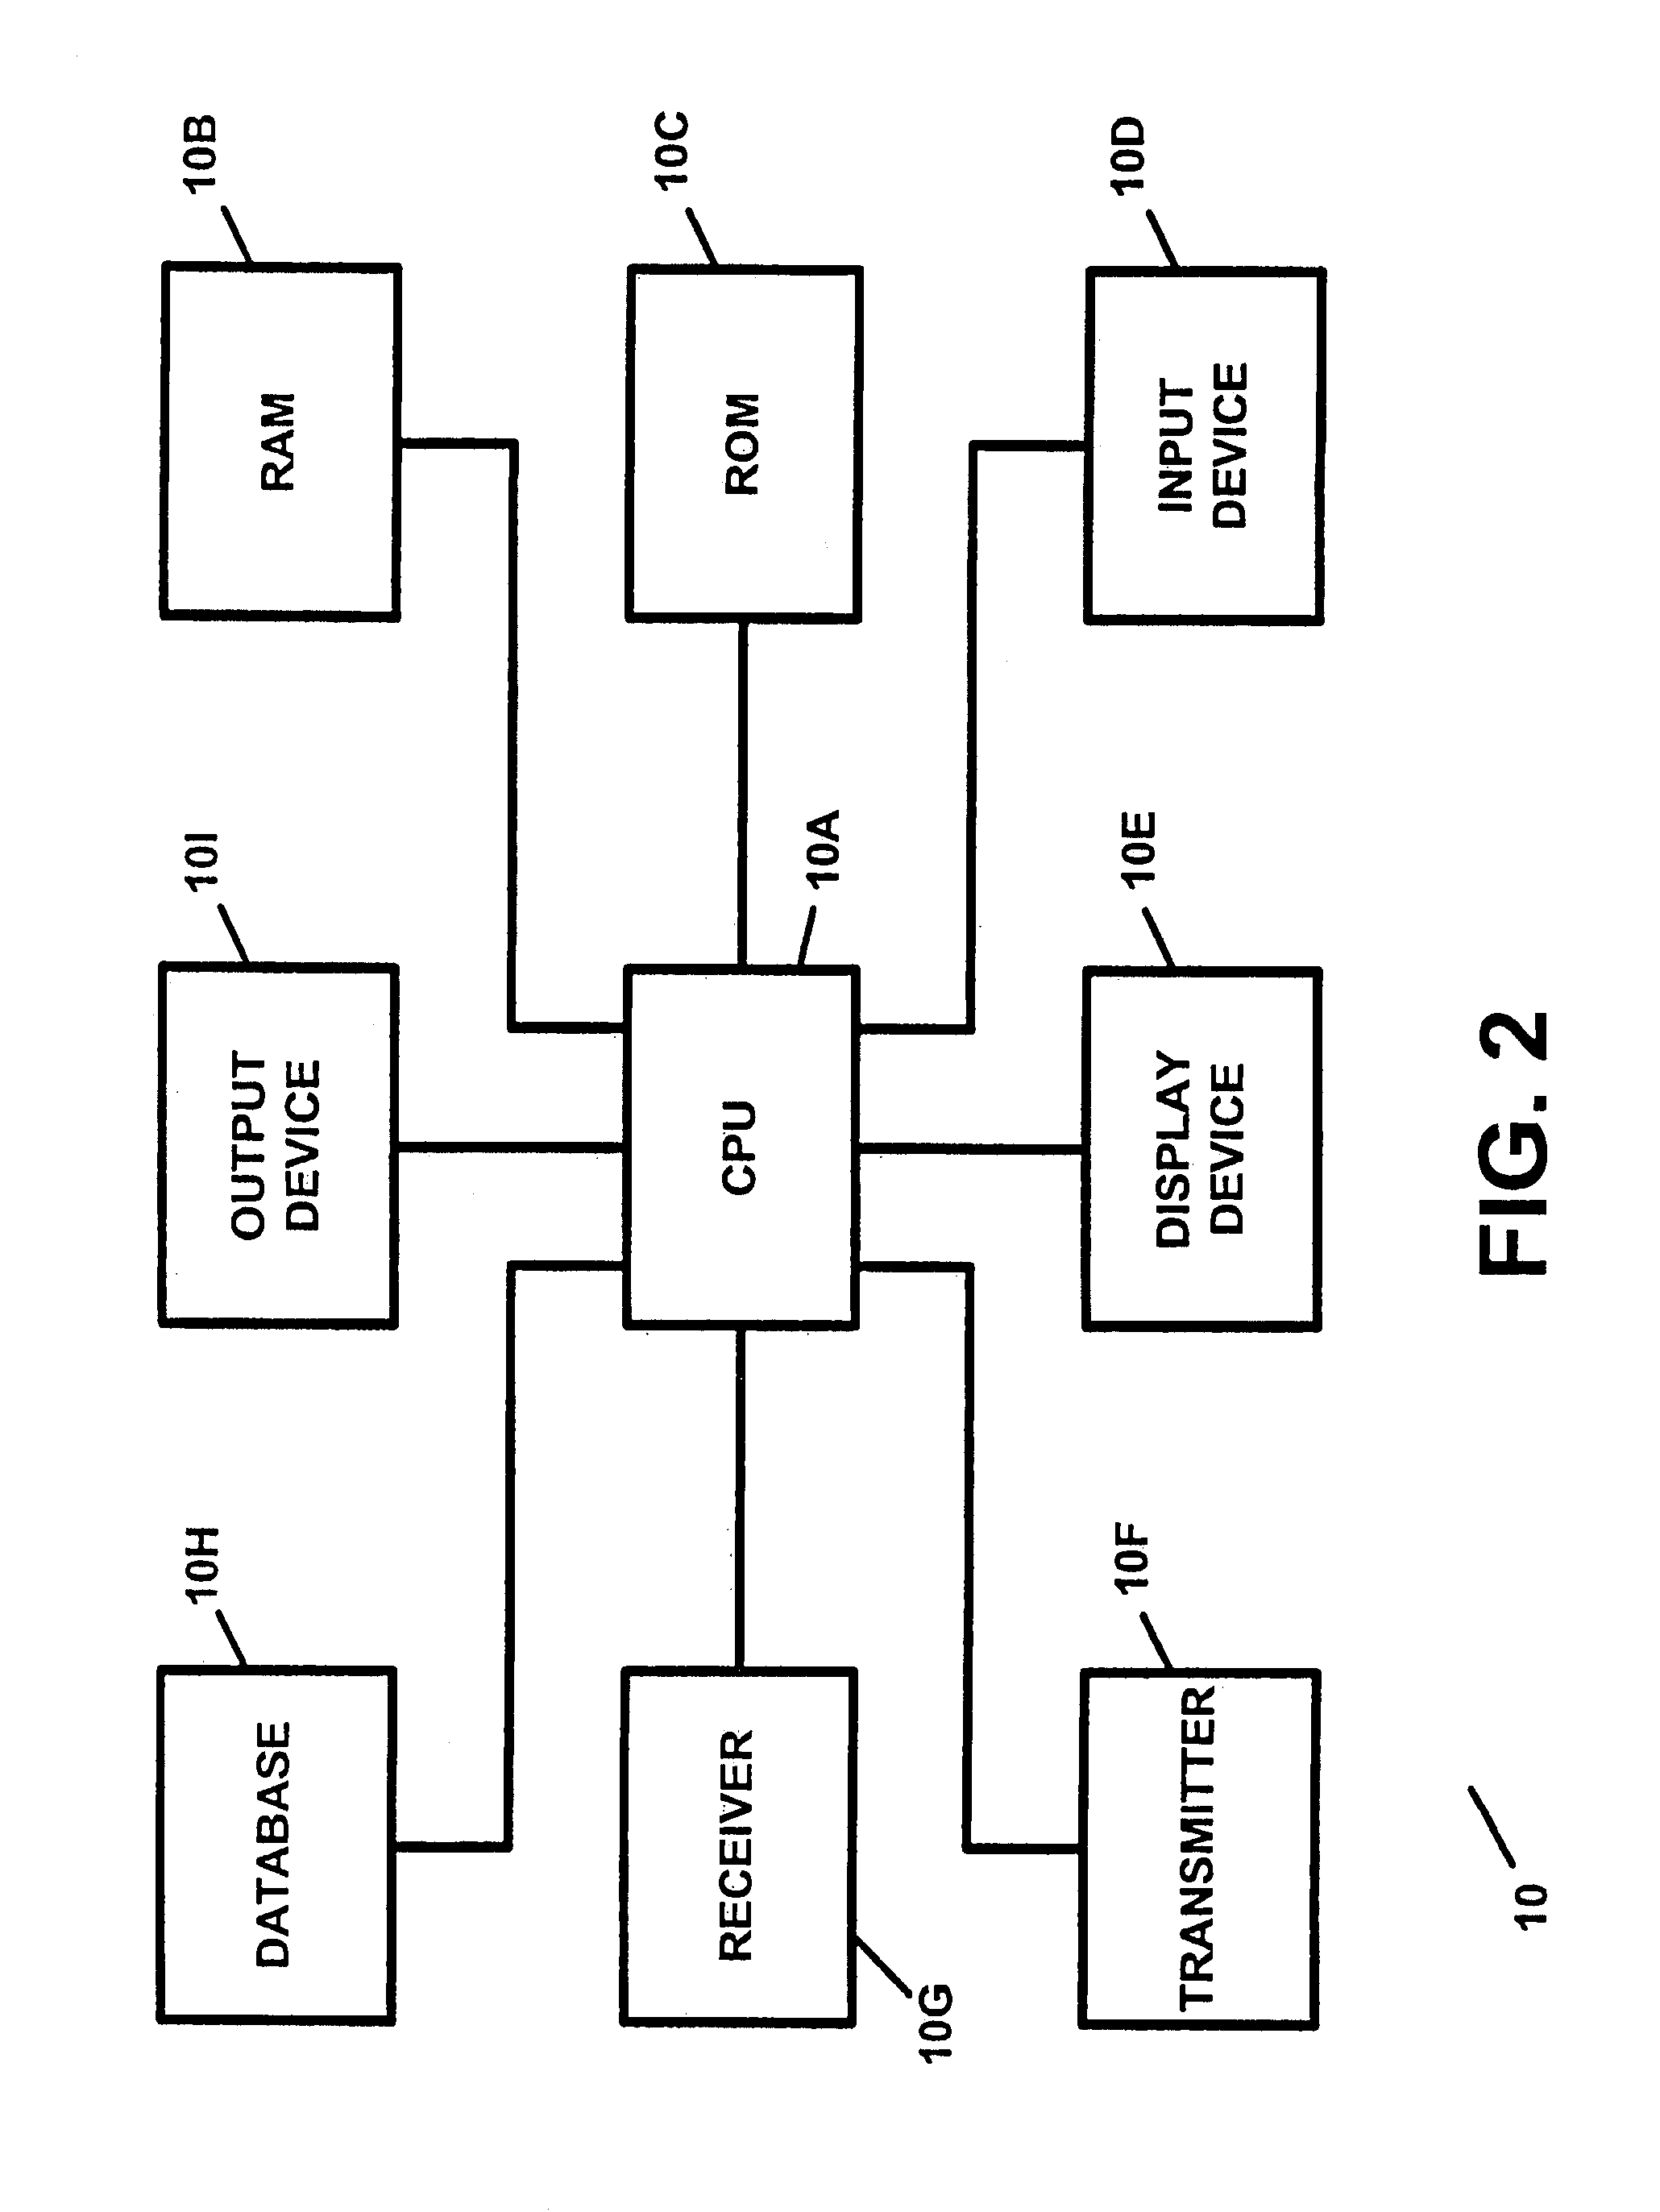 Apparatus and method for providing employee benefits and /or employee benefits information